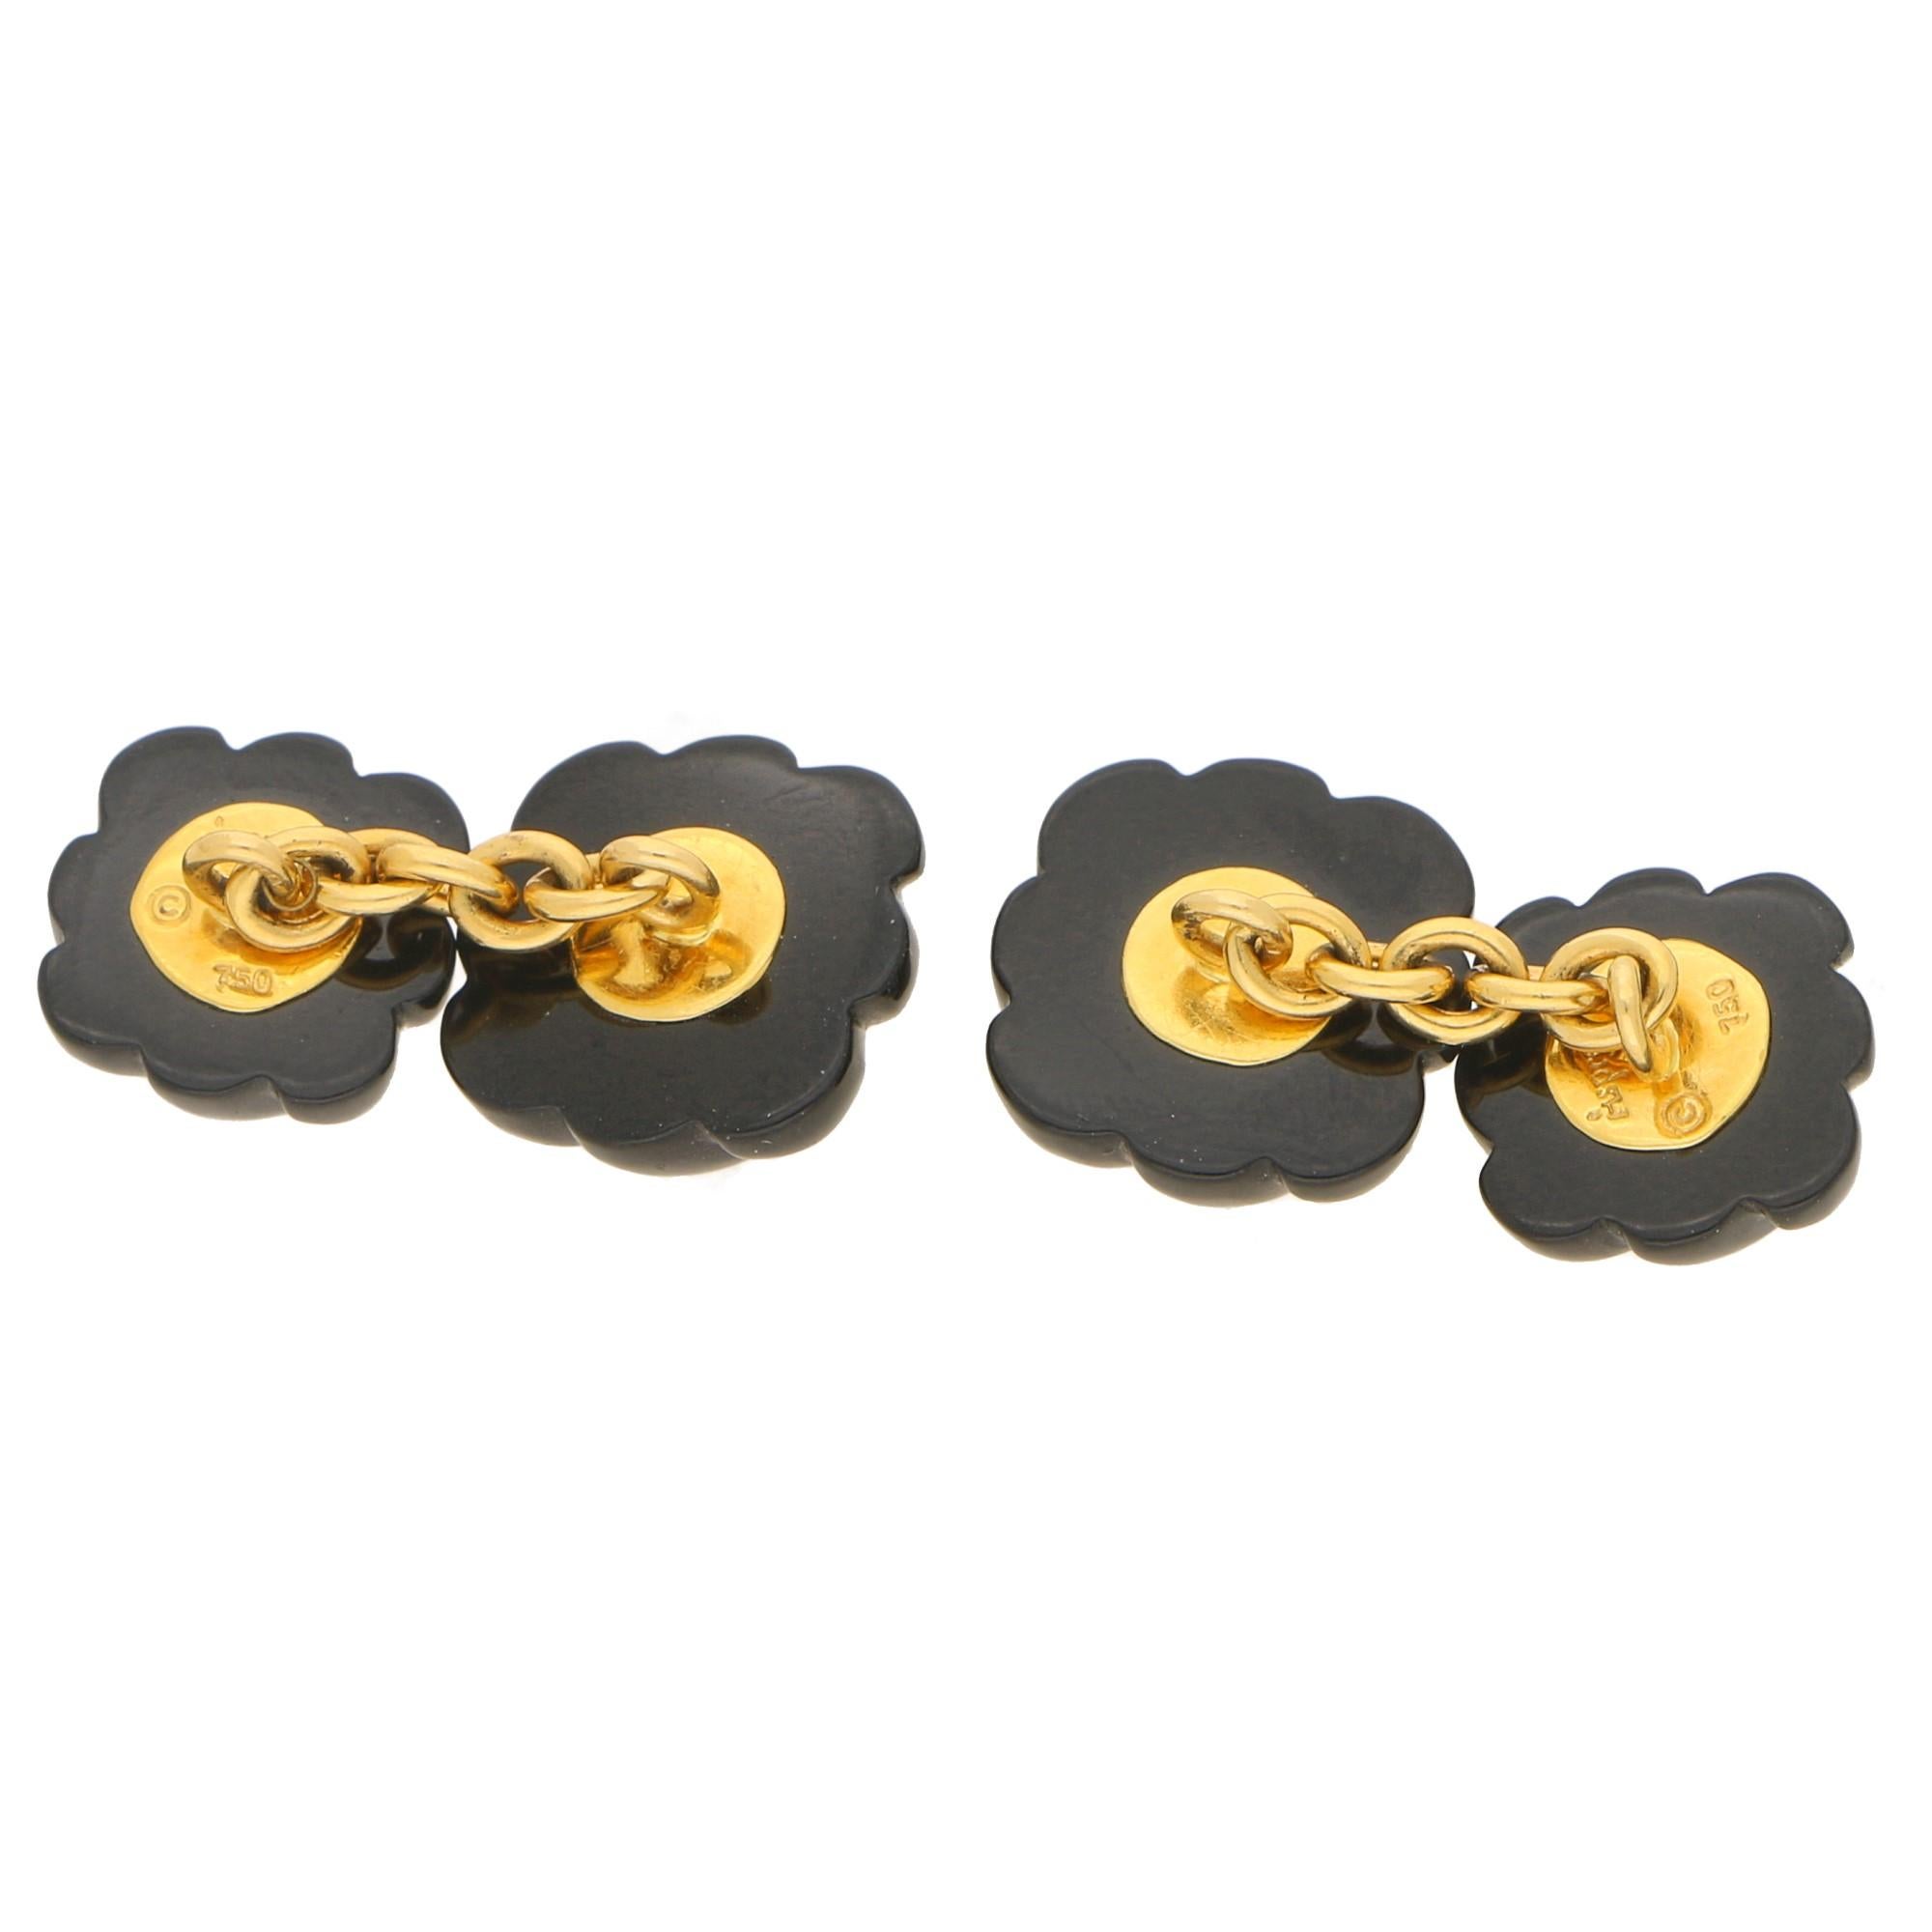 A sophisticated pair of carved onyx and diamond cufflinks set in 18ct yellow gold, signed Asprey. This interesting pair features a Celtic knot with a stylised carved onyx body embellished to the centre with a round brilliant cut diamond in a yellow